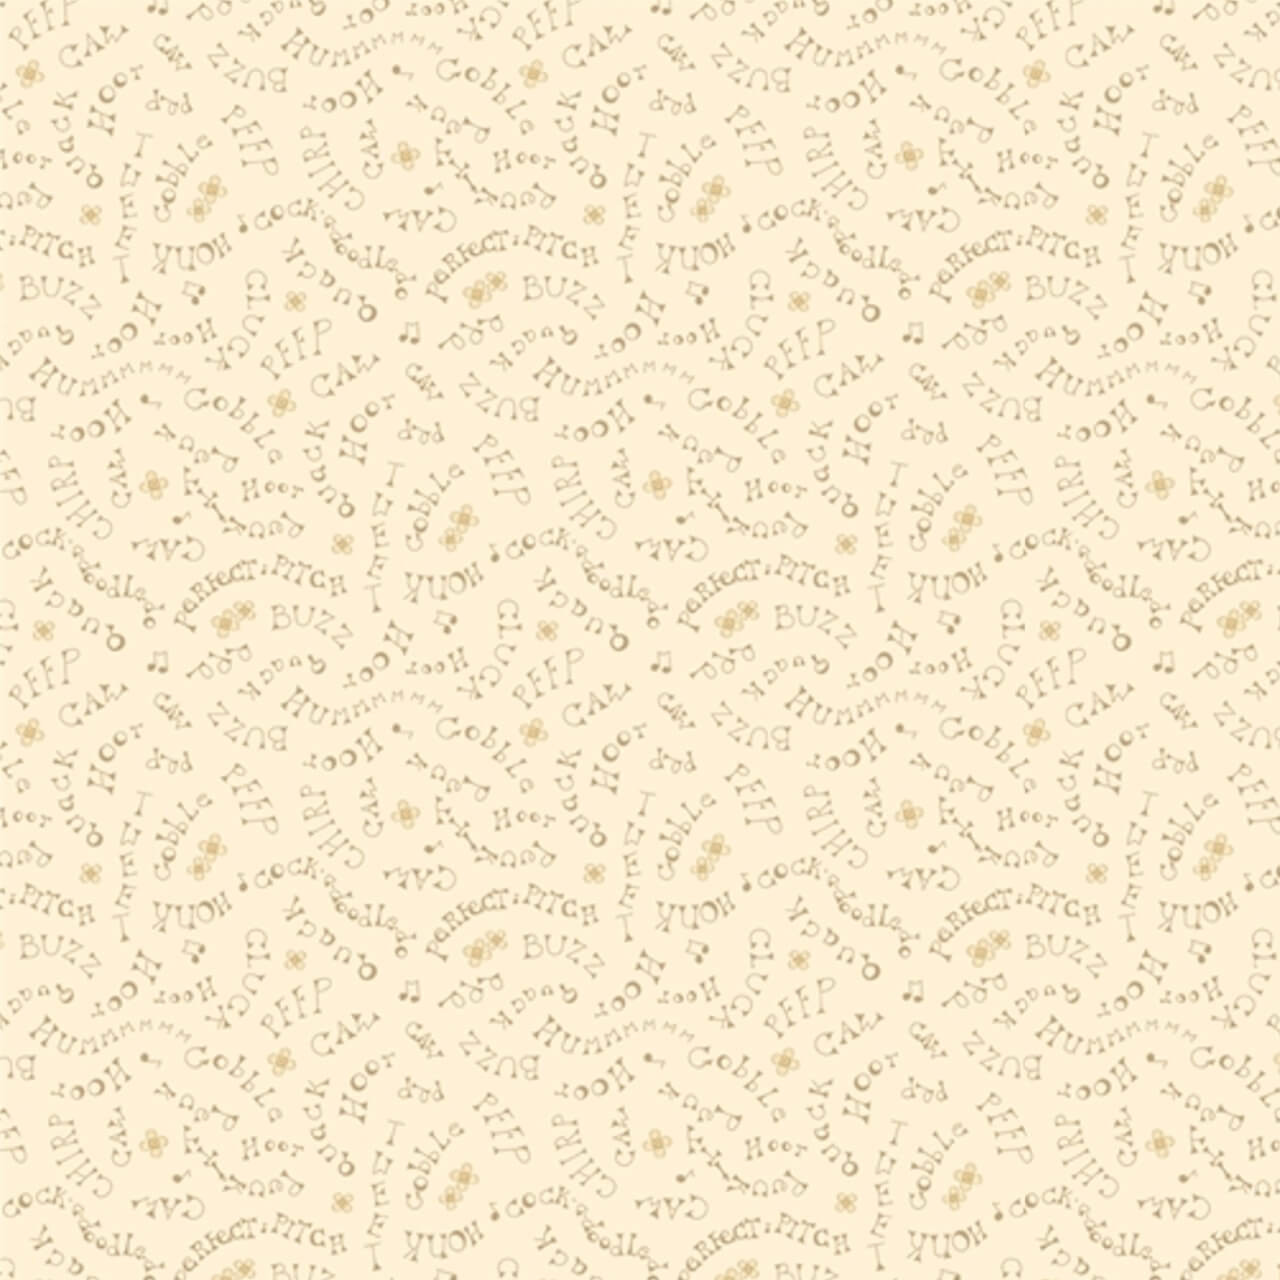 Fabric Sample: Choir Voice on cream from the Nature's Voice Collection by Michael Miller